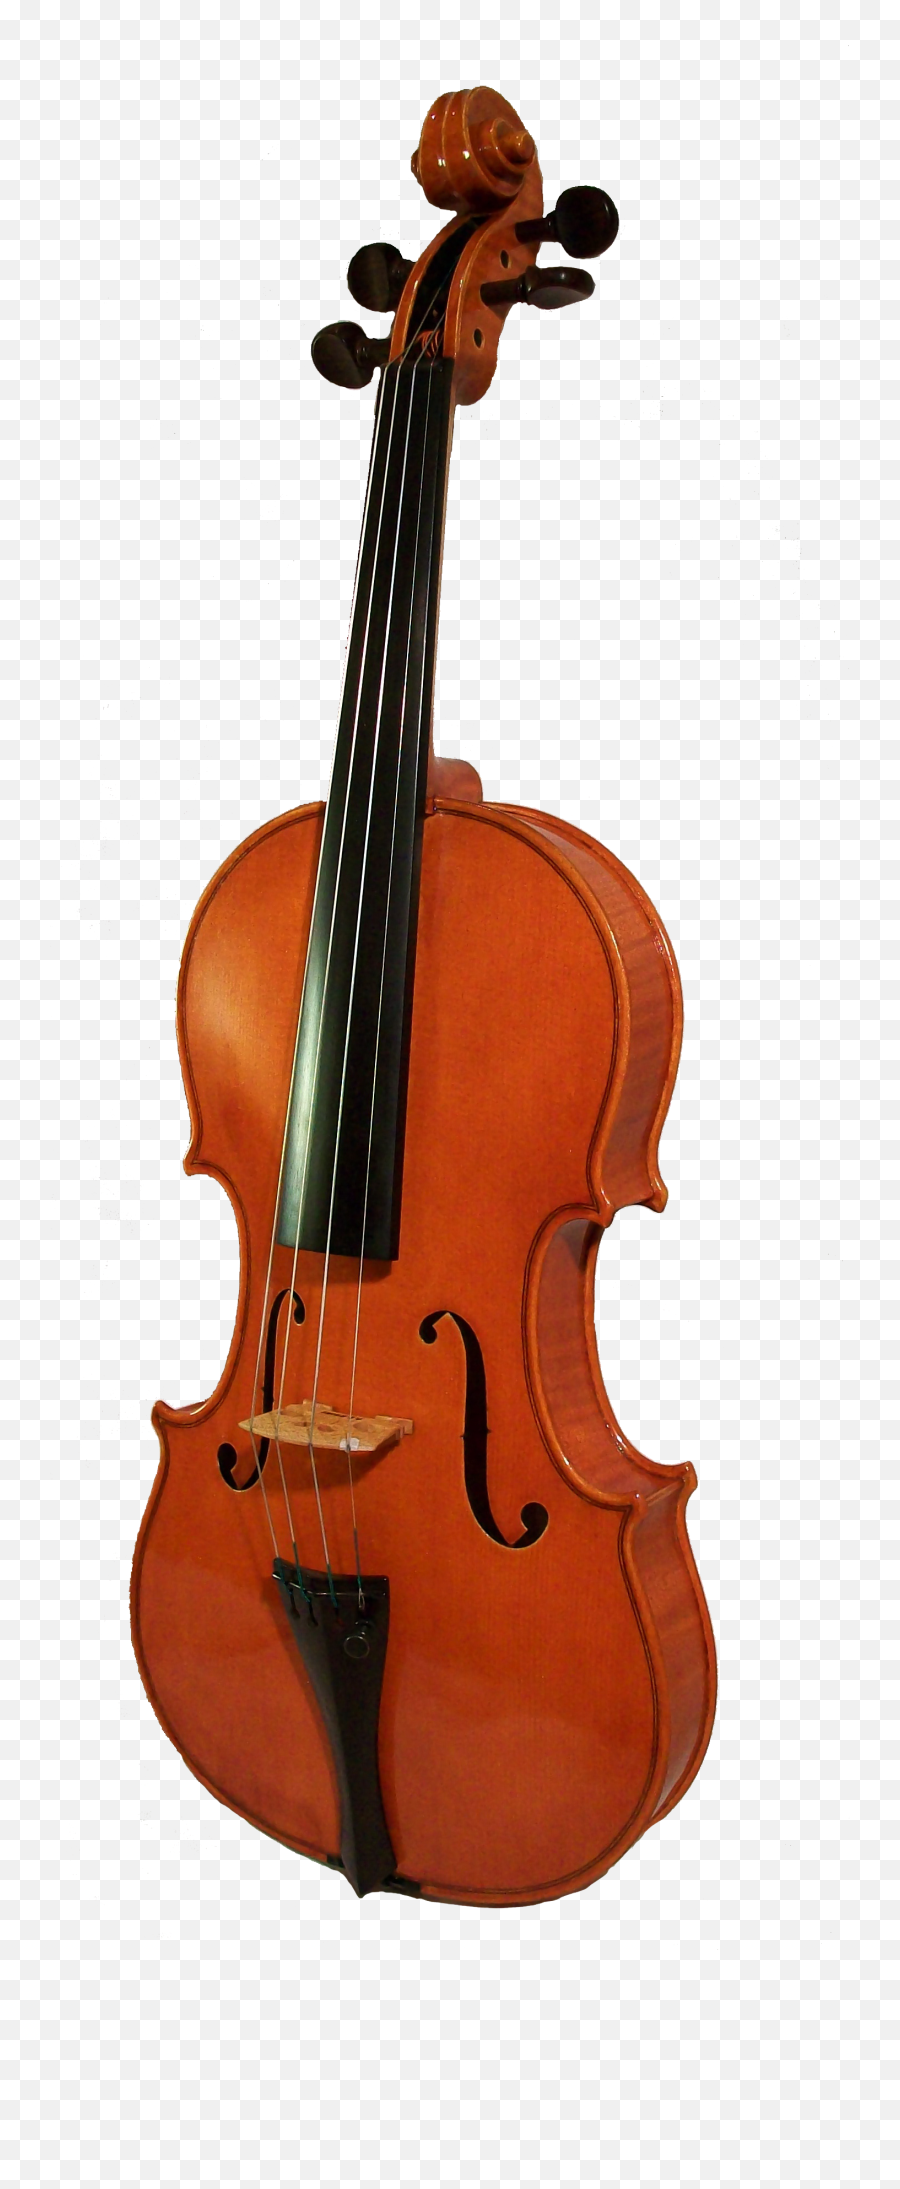 Violin Png Transparent Images Clipart - Violin With No Background,Fiddle Png